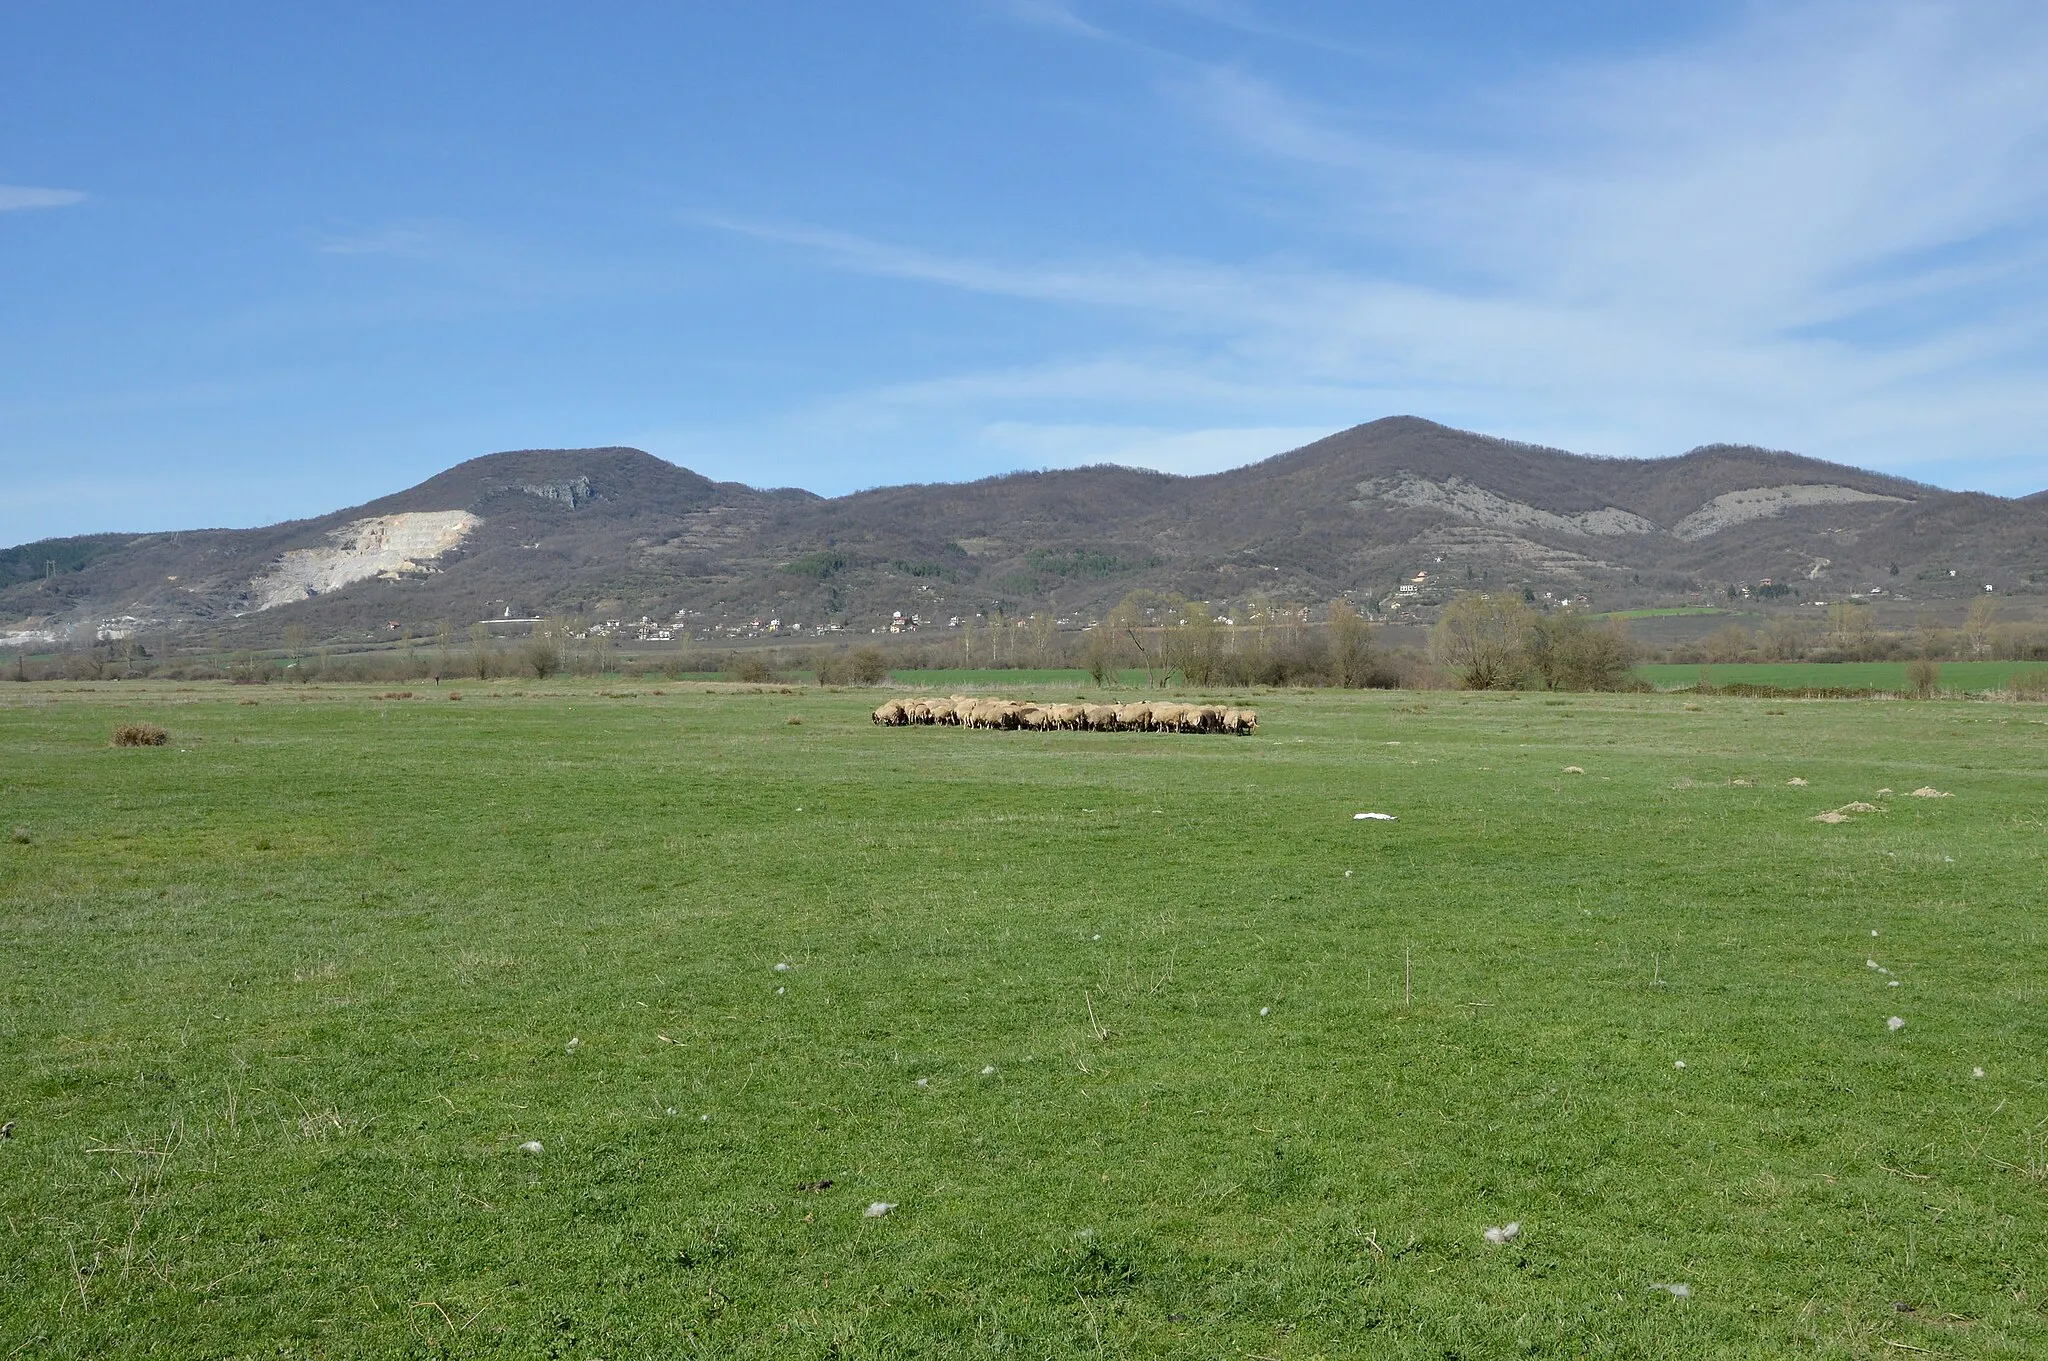 Photo showing: Sheep flock at a meadow near Skravena, Botevgrad municipality, Bulgaria. At the back is Lakavitsa ridge of the Prebalkan. Quarry "Skravena" can also be seen to the left.